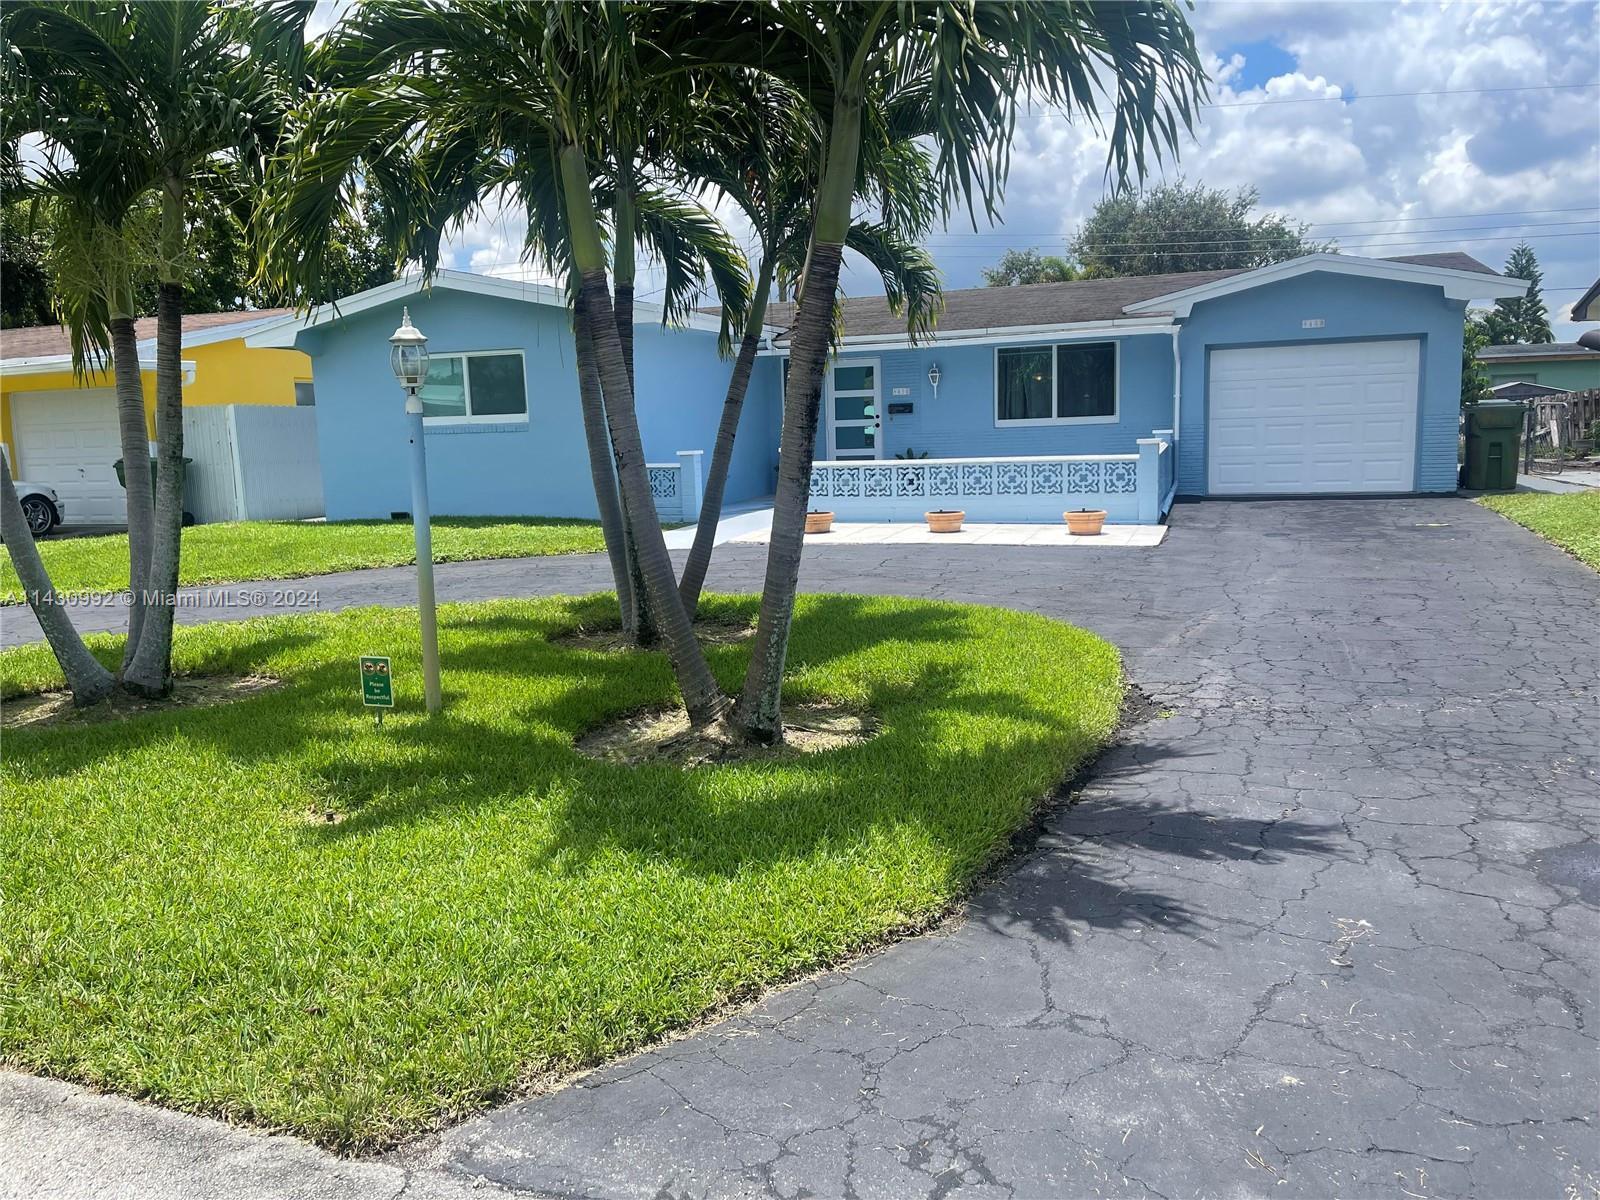 Photo of 8450 NW 15th St in Pembroke Pines, FL